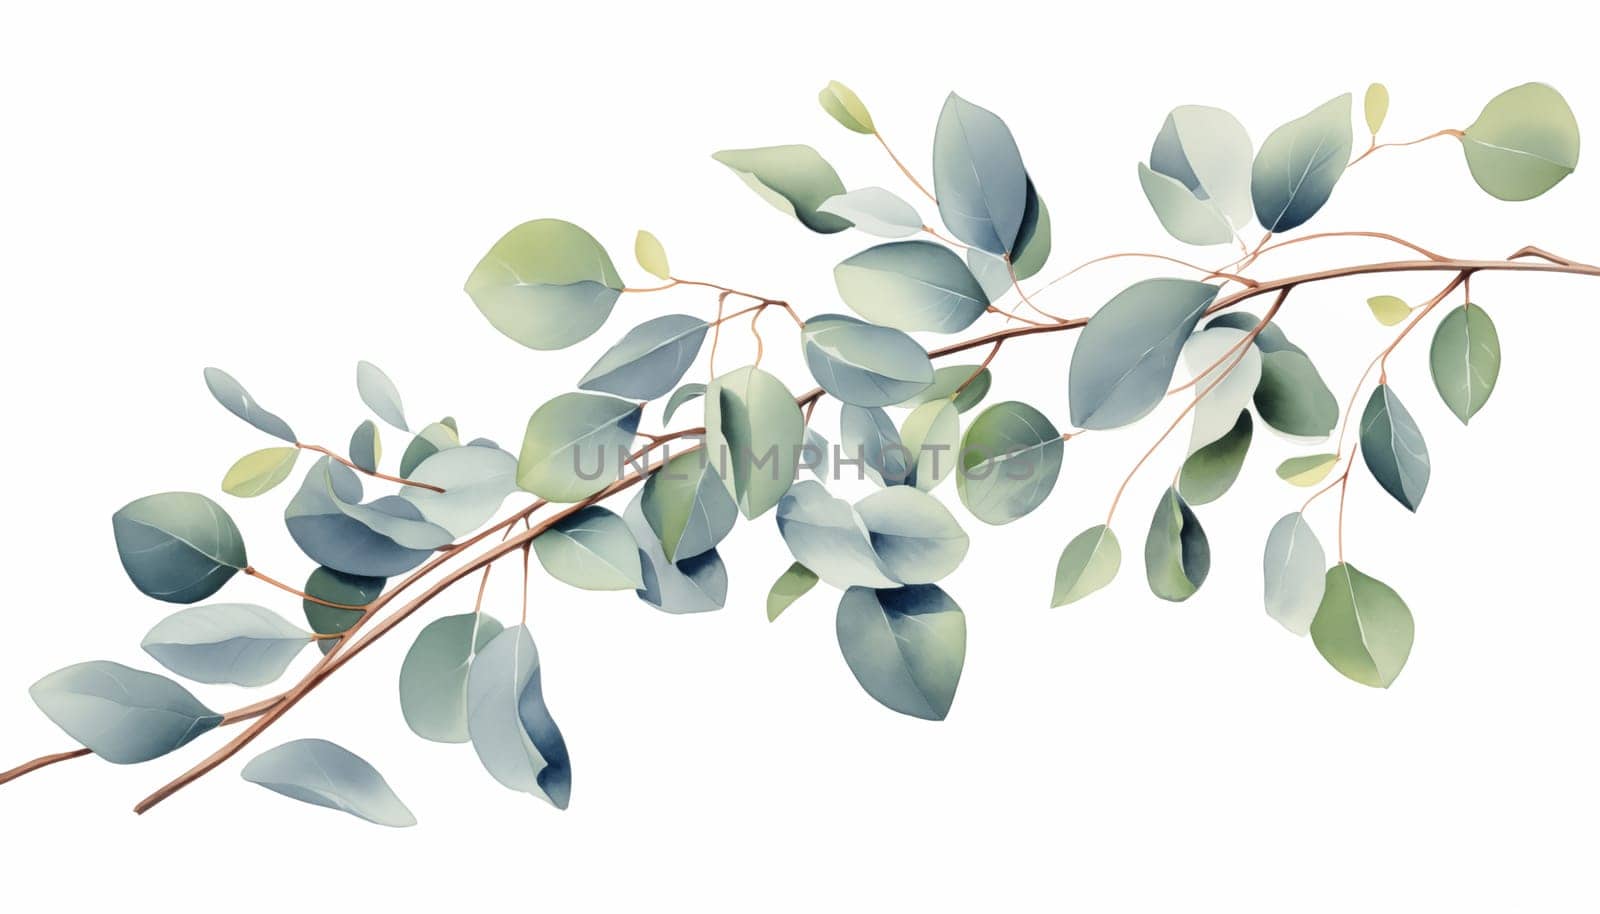 Watercolor Eucalyptus by Nadtochiy